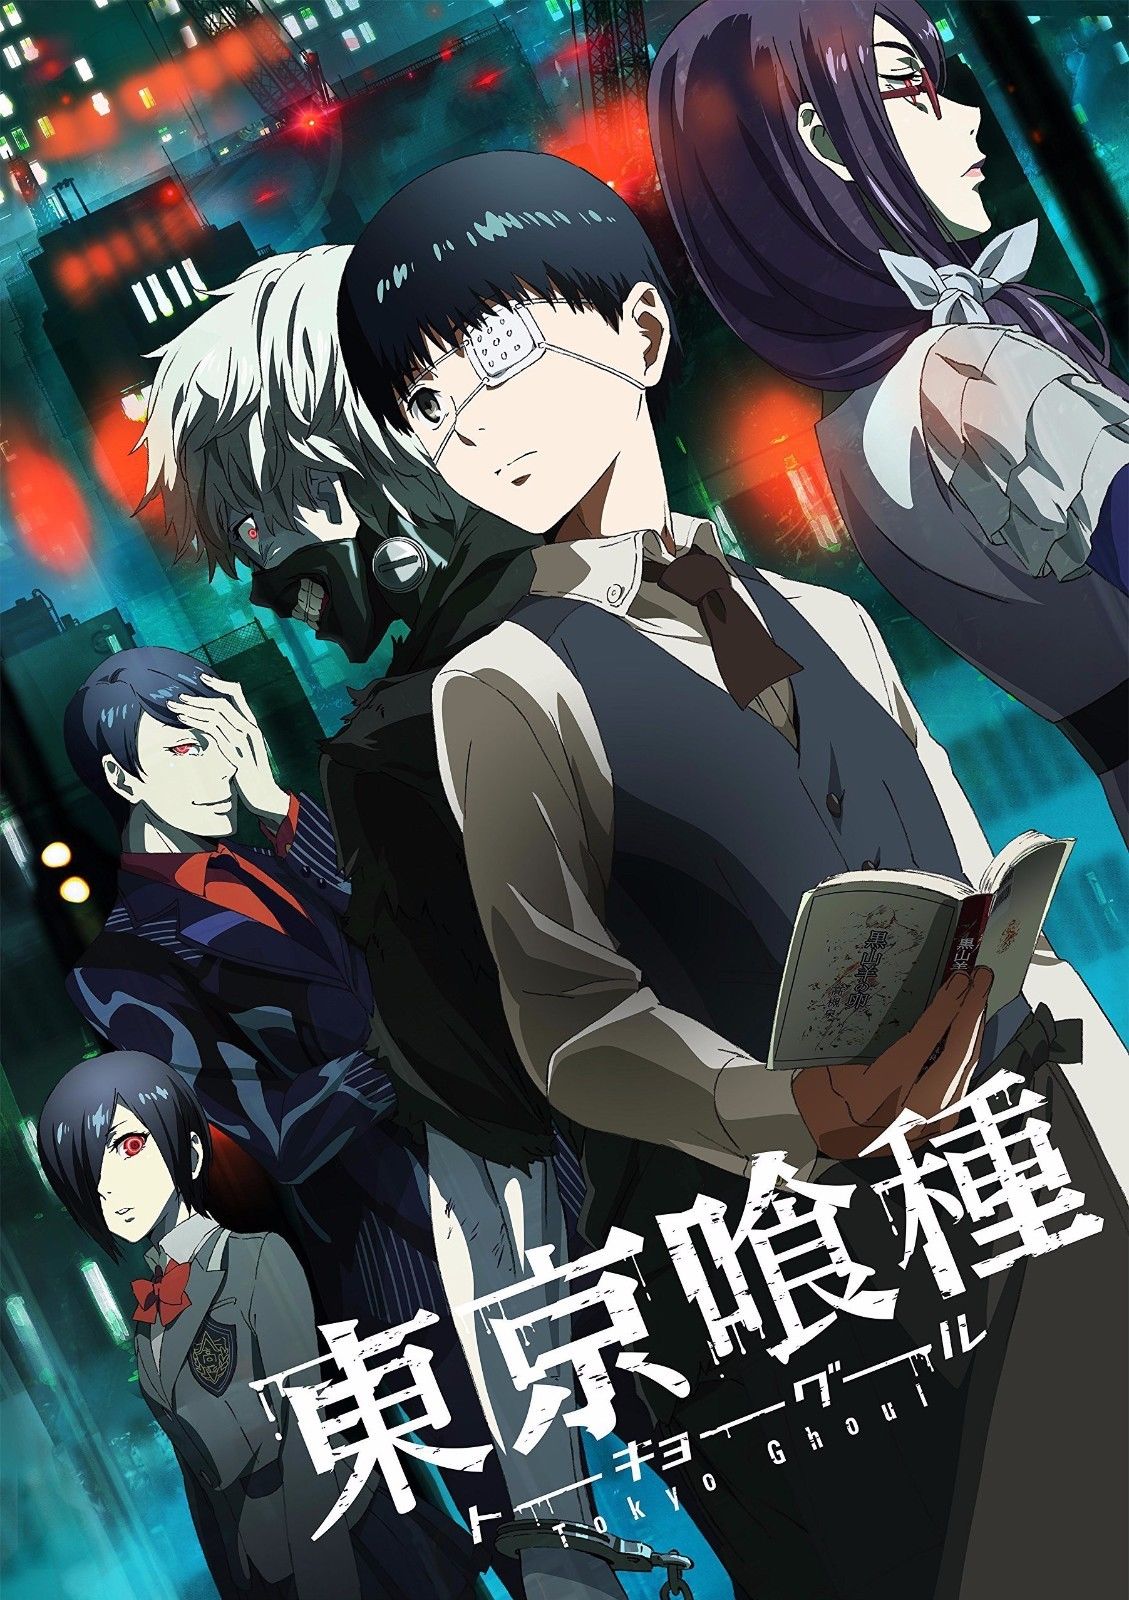 Best of Tokyo ghoul episode 1 dubbed